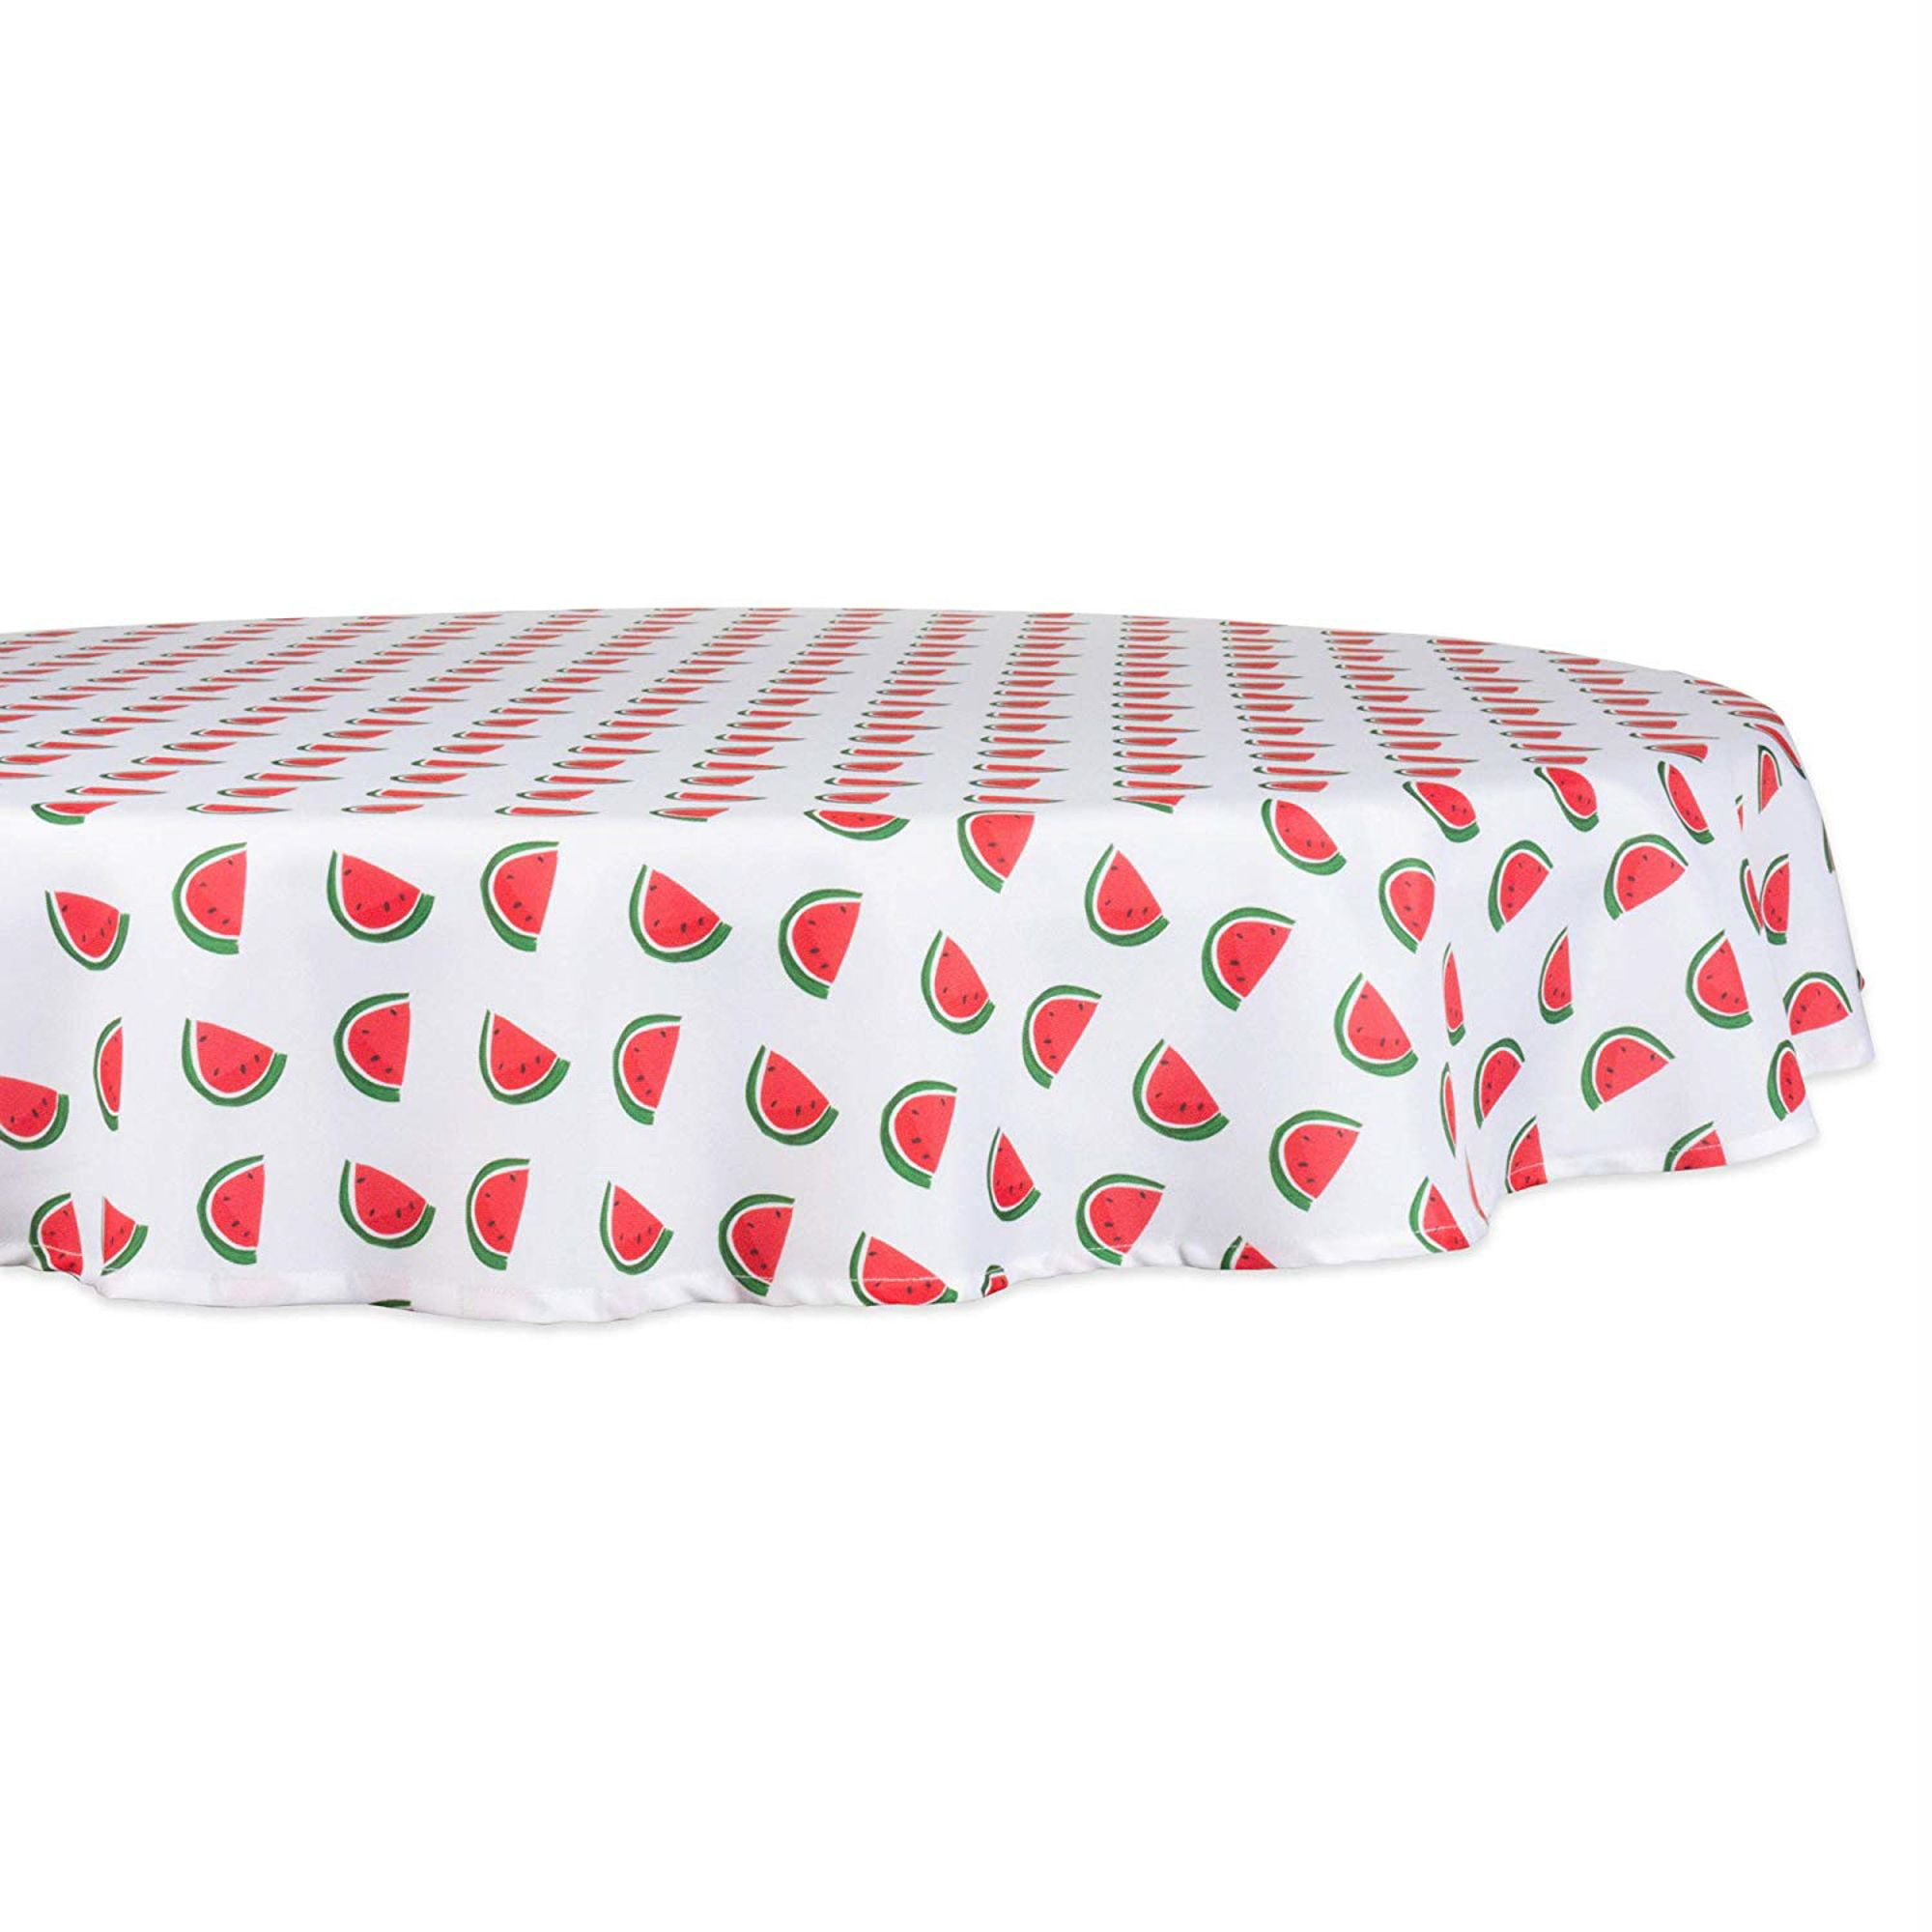 DII Watermelon Print Outdoor Tablecloth 60